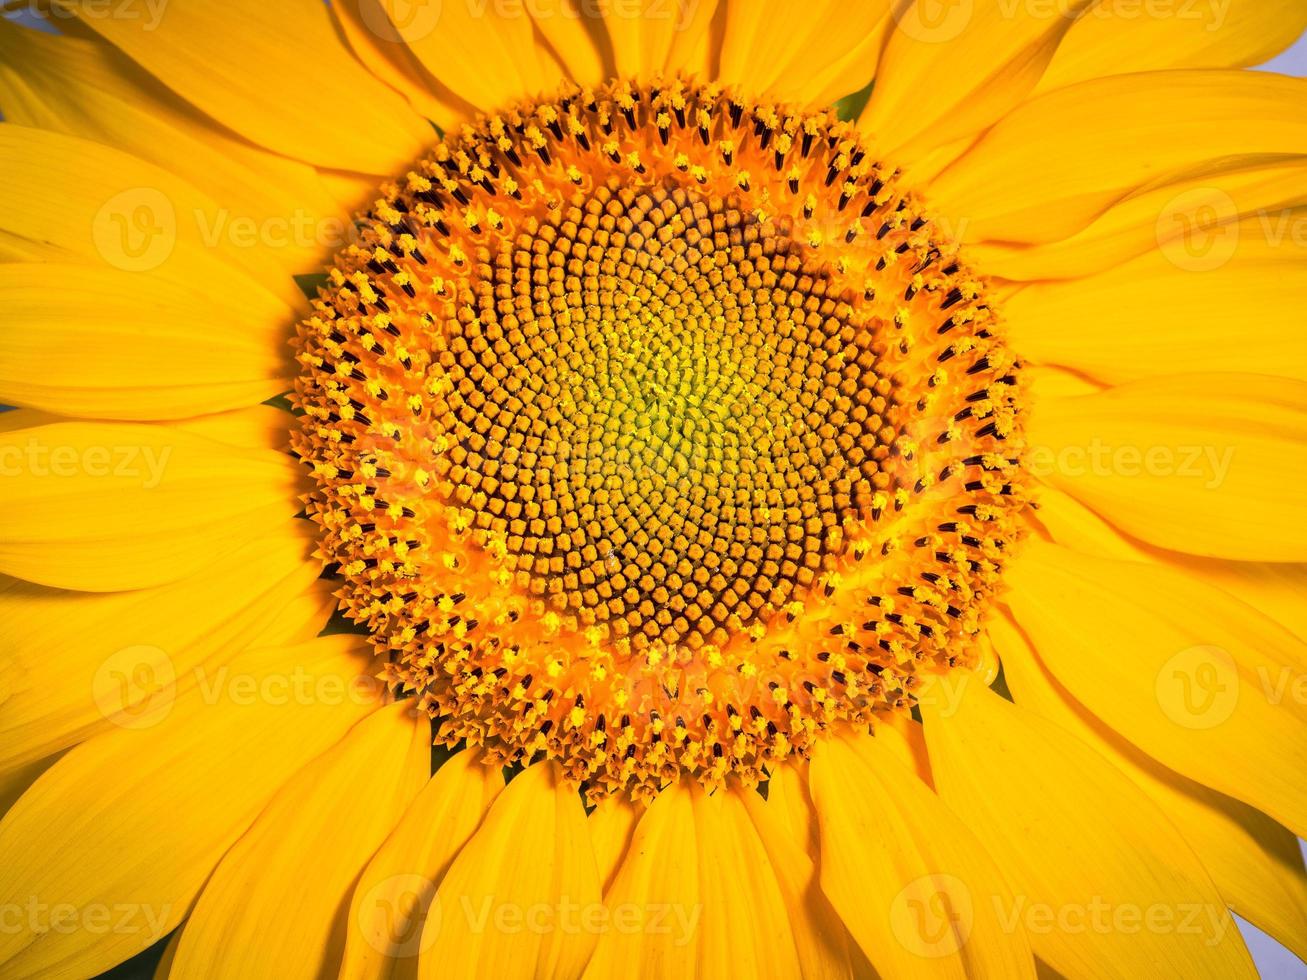 Sunflower flower photo on the front with details